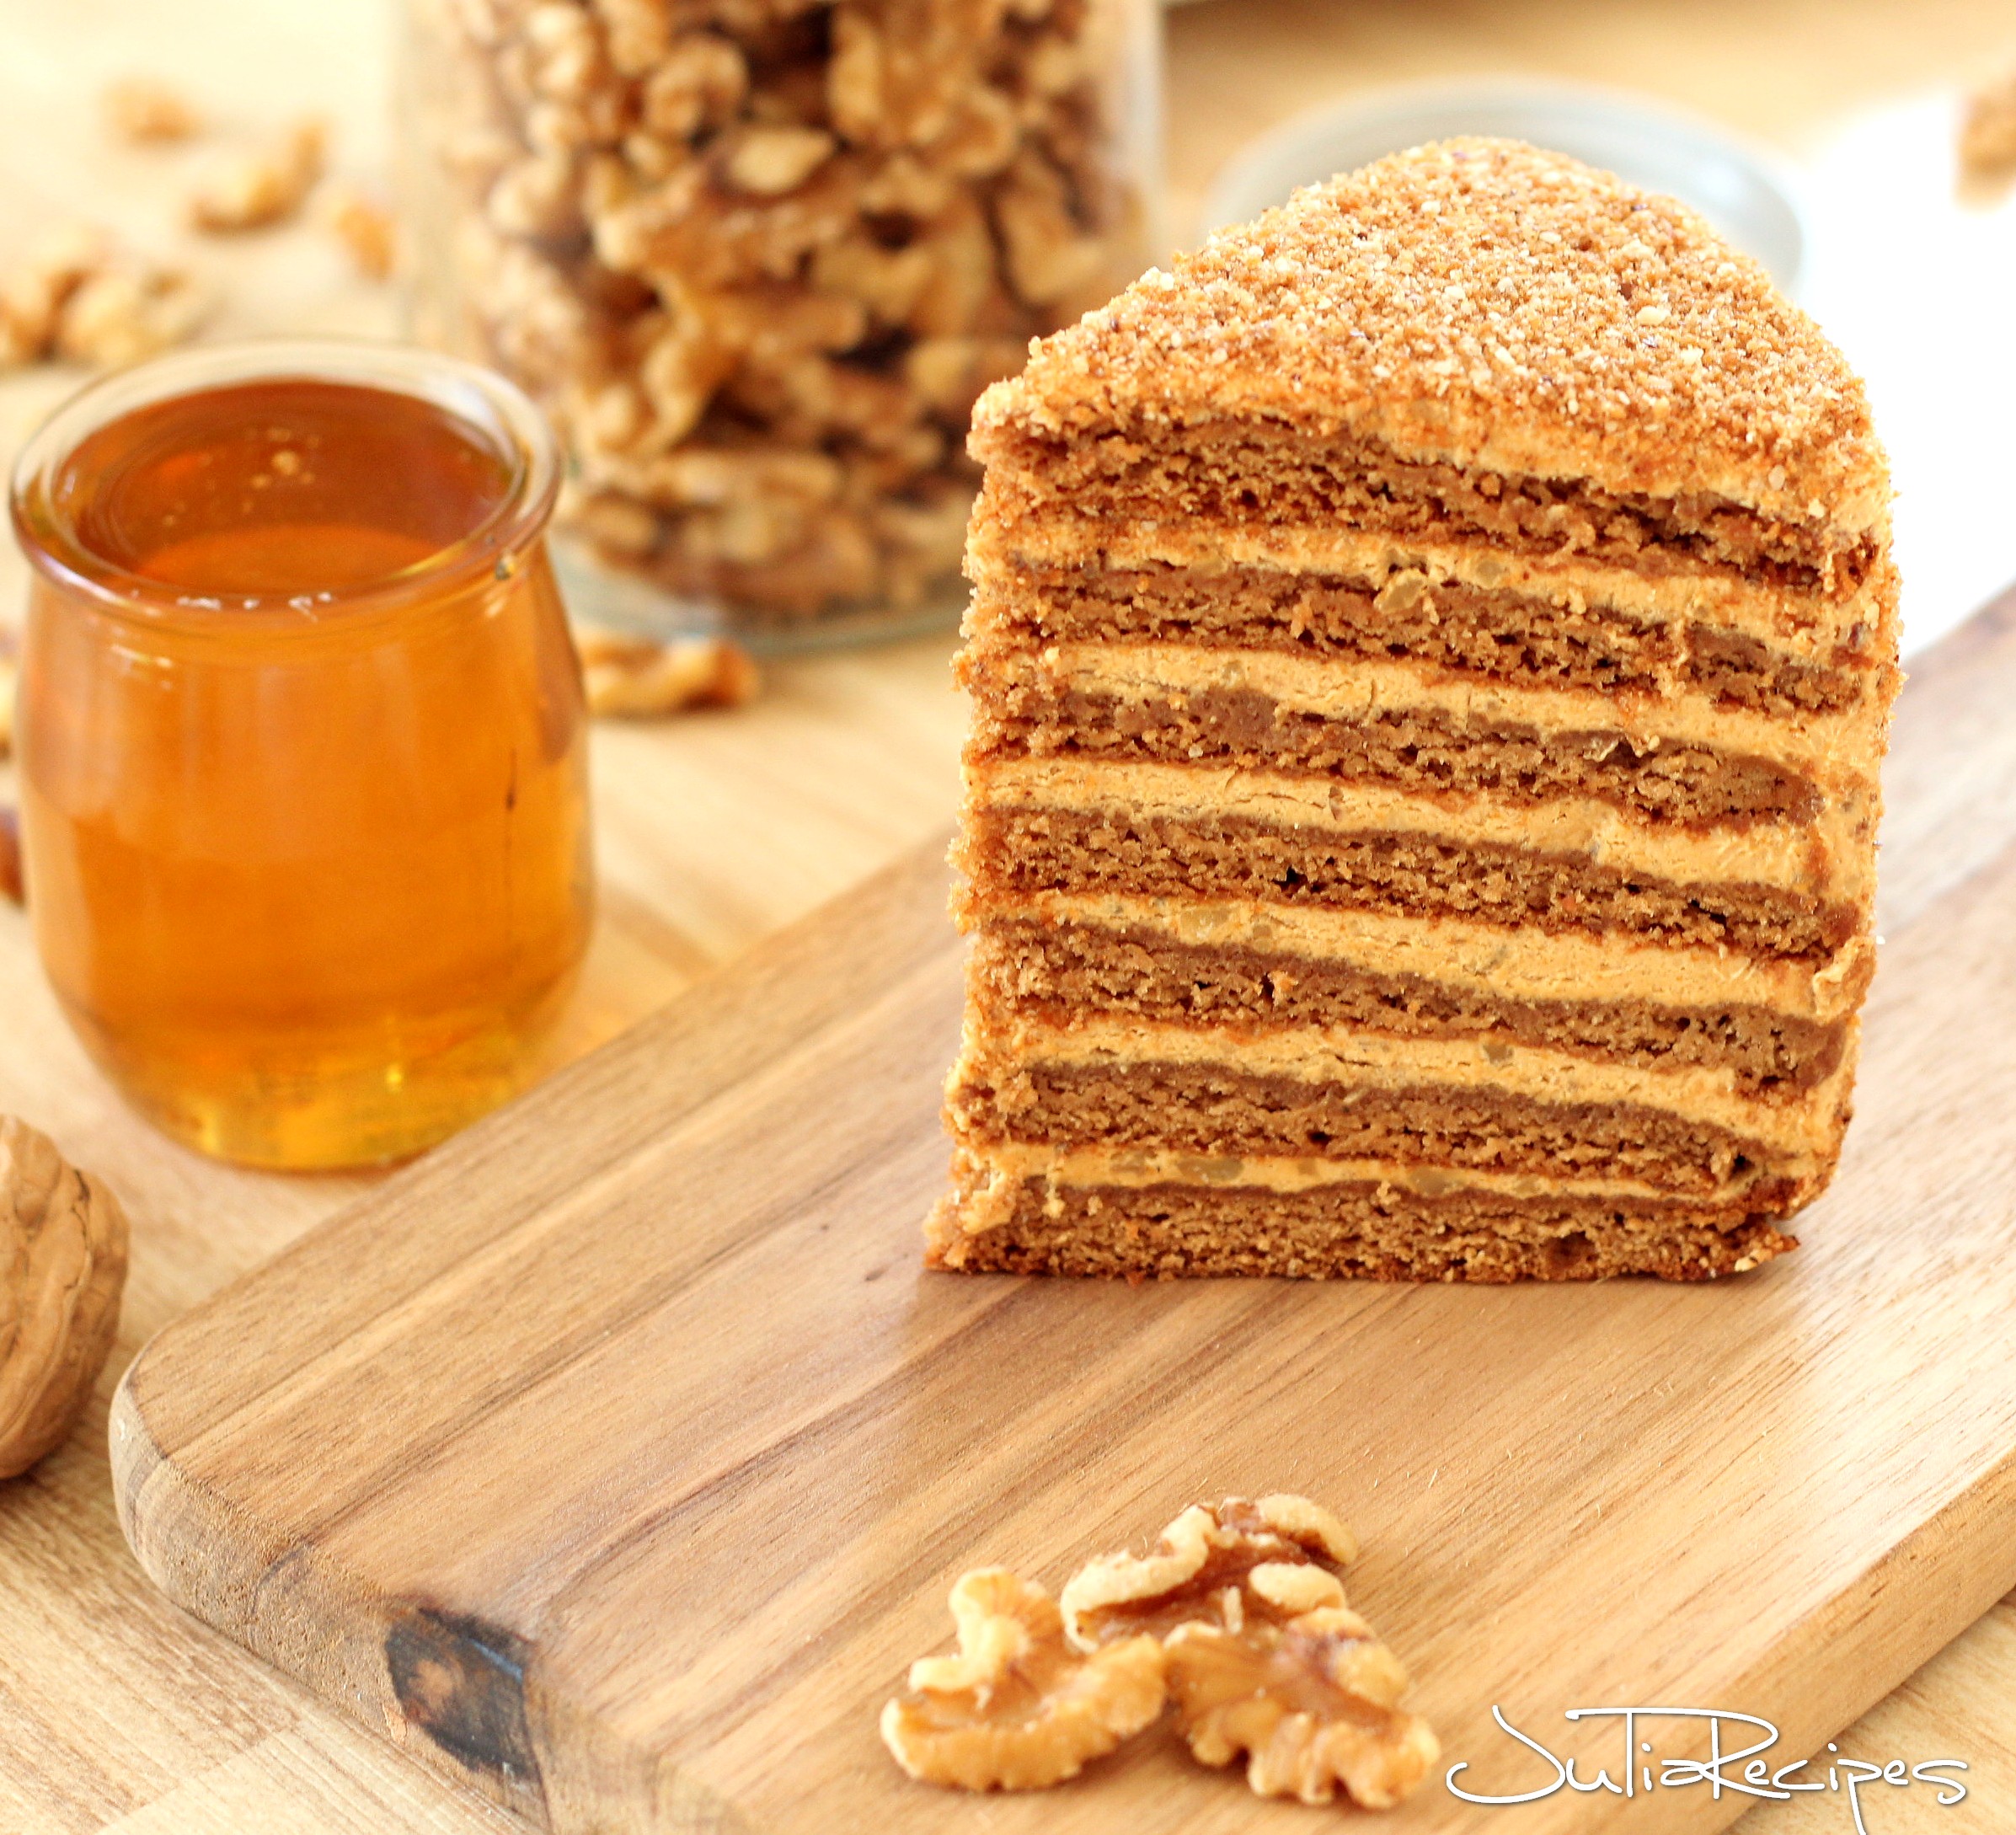 cake with dulce de leche layers on wodden board